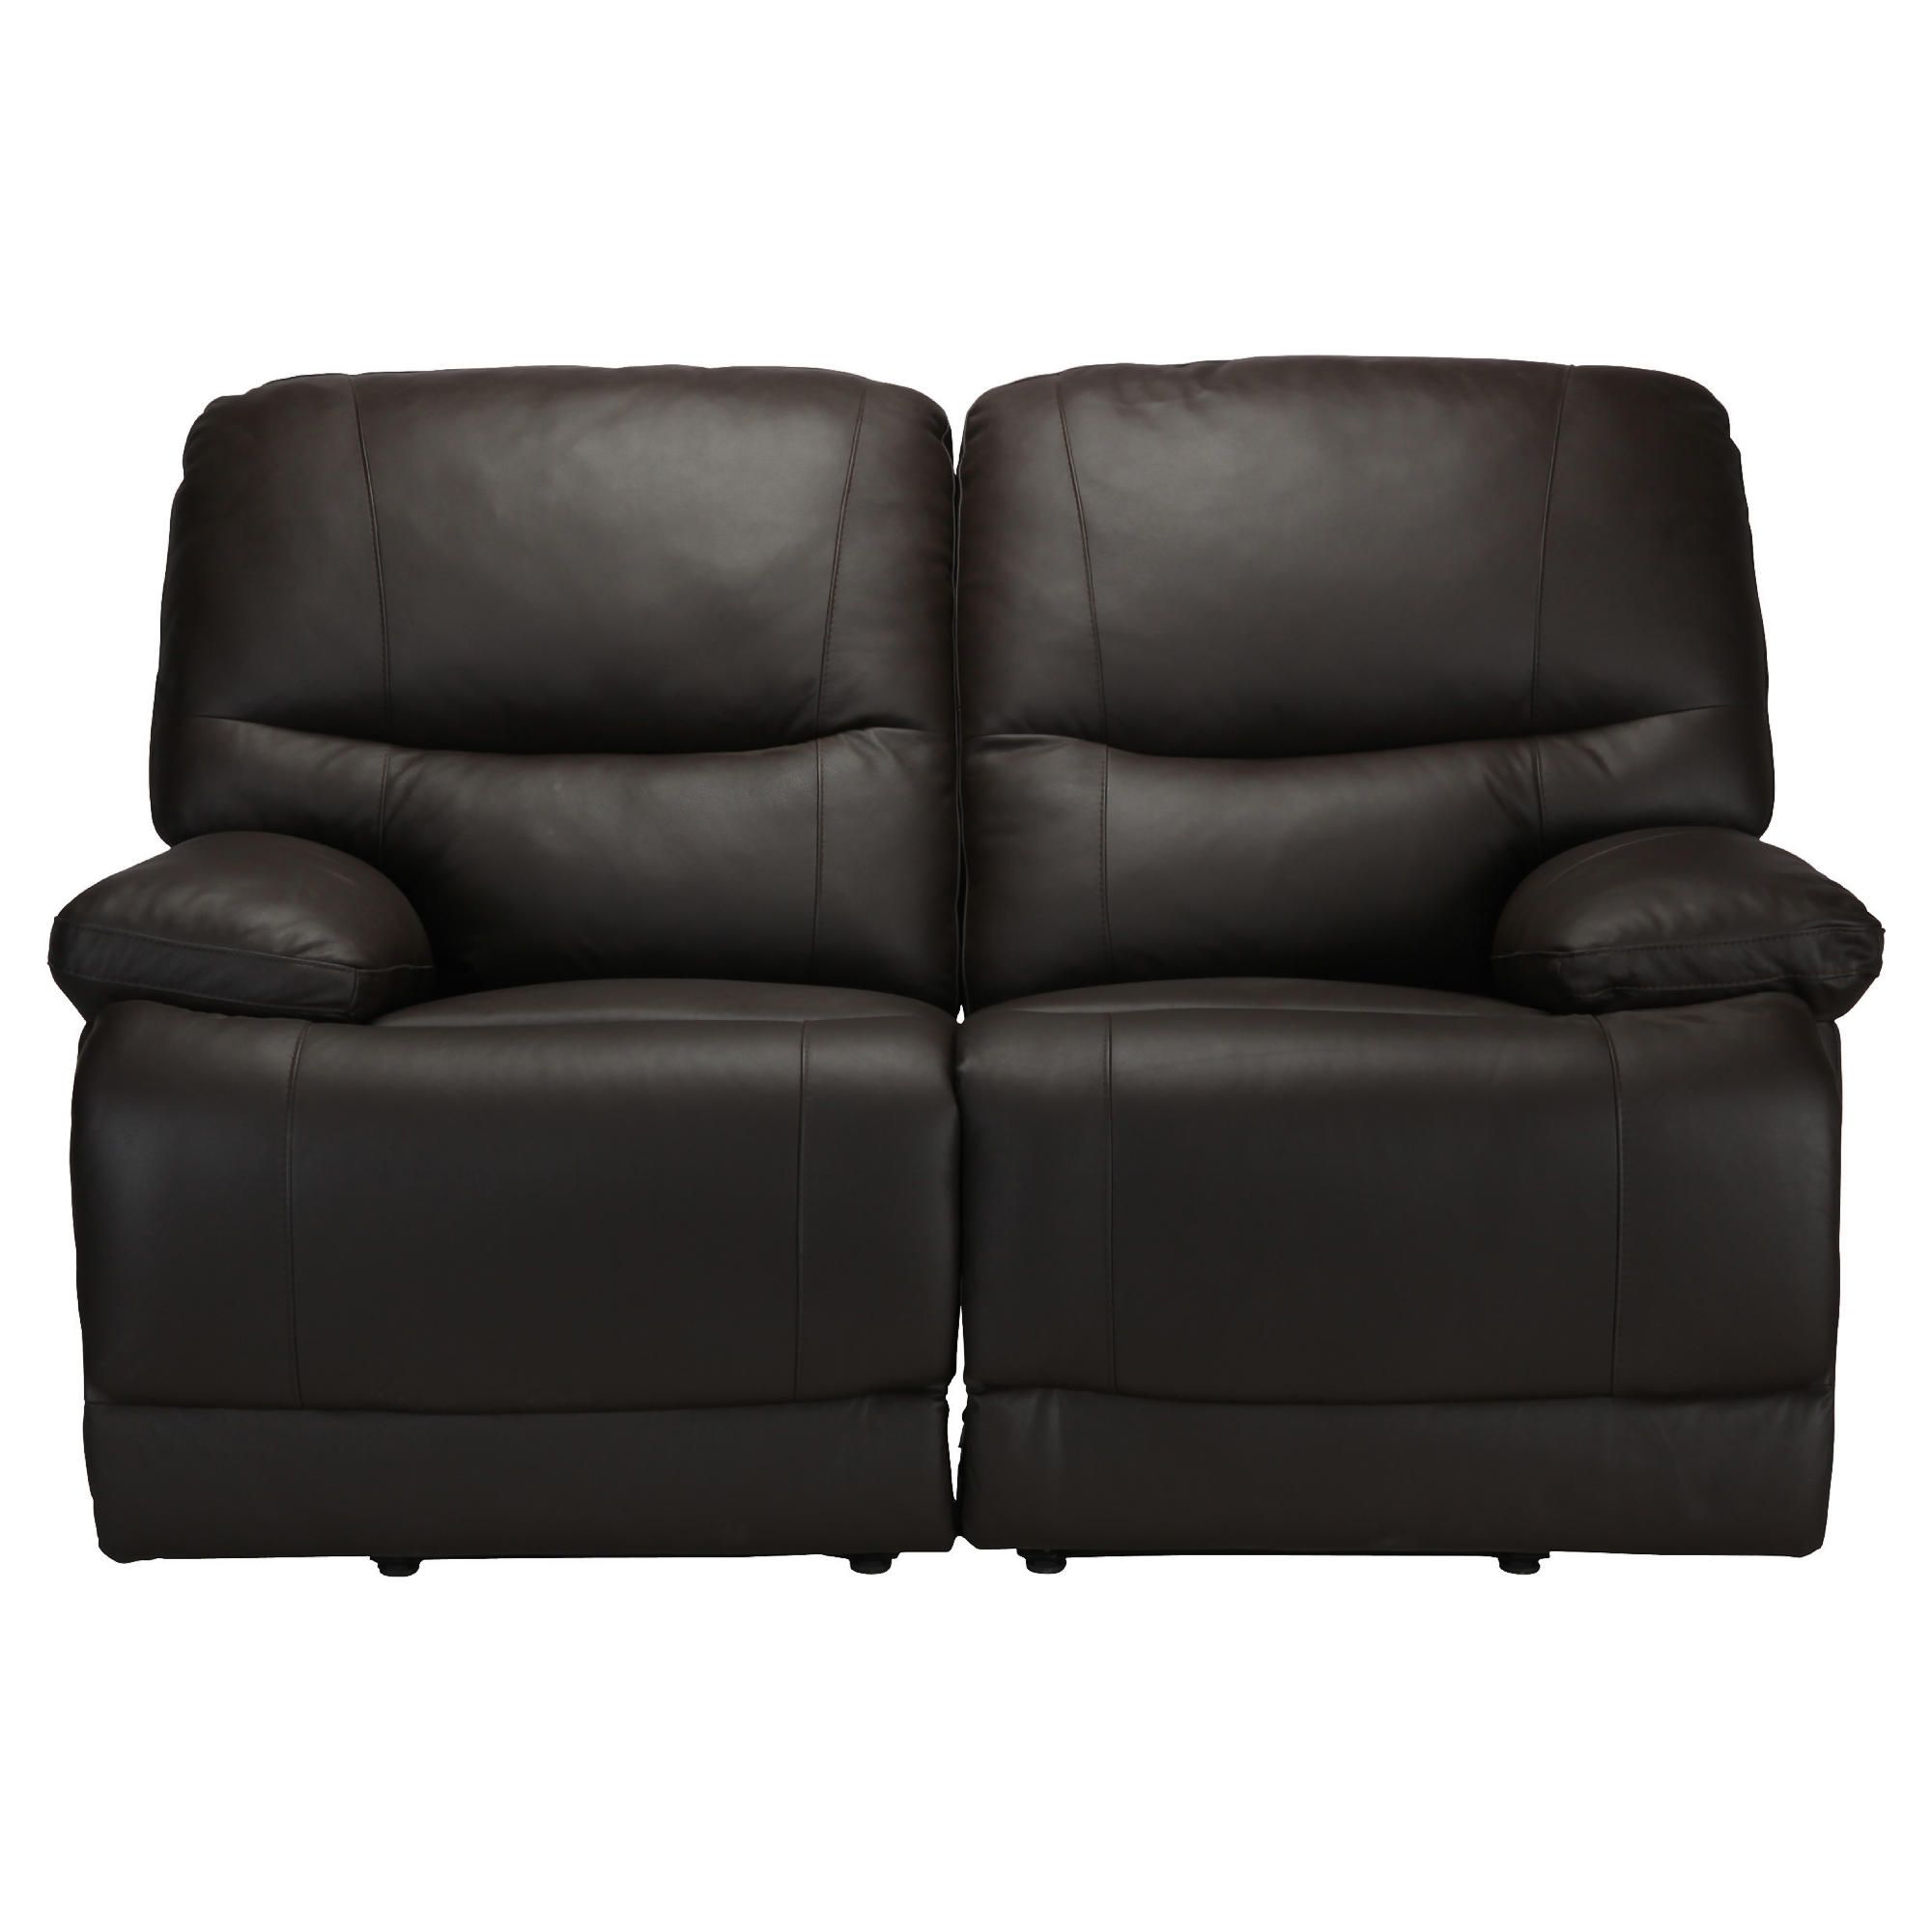 Angelo Leather Small Double Recliner Sofa, Chocolate at Tesco Direct